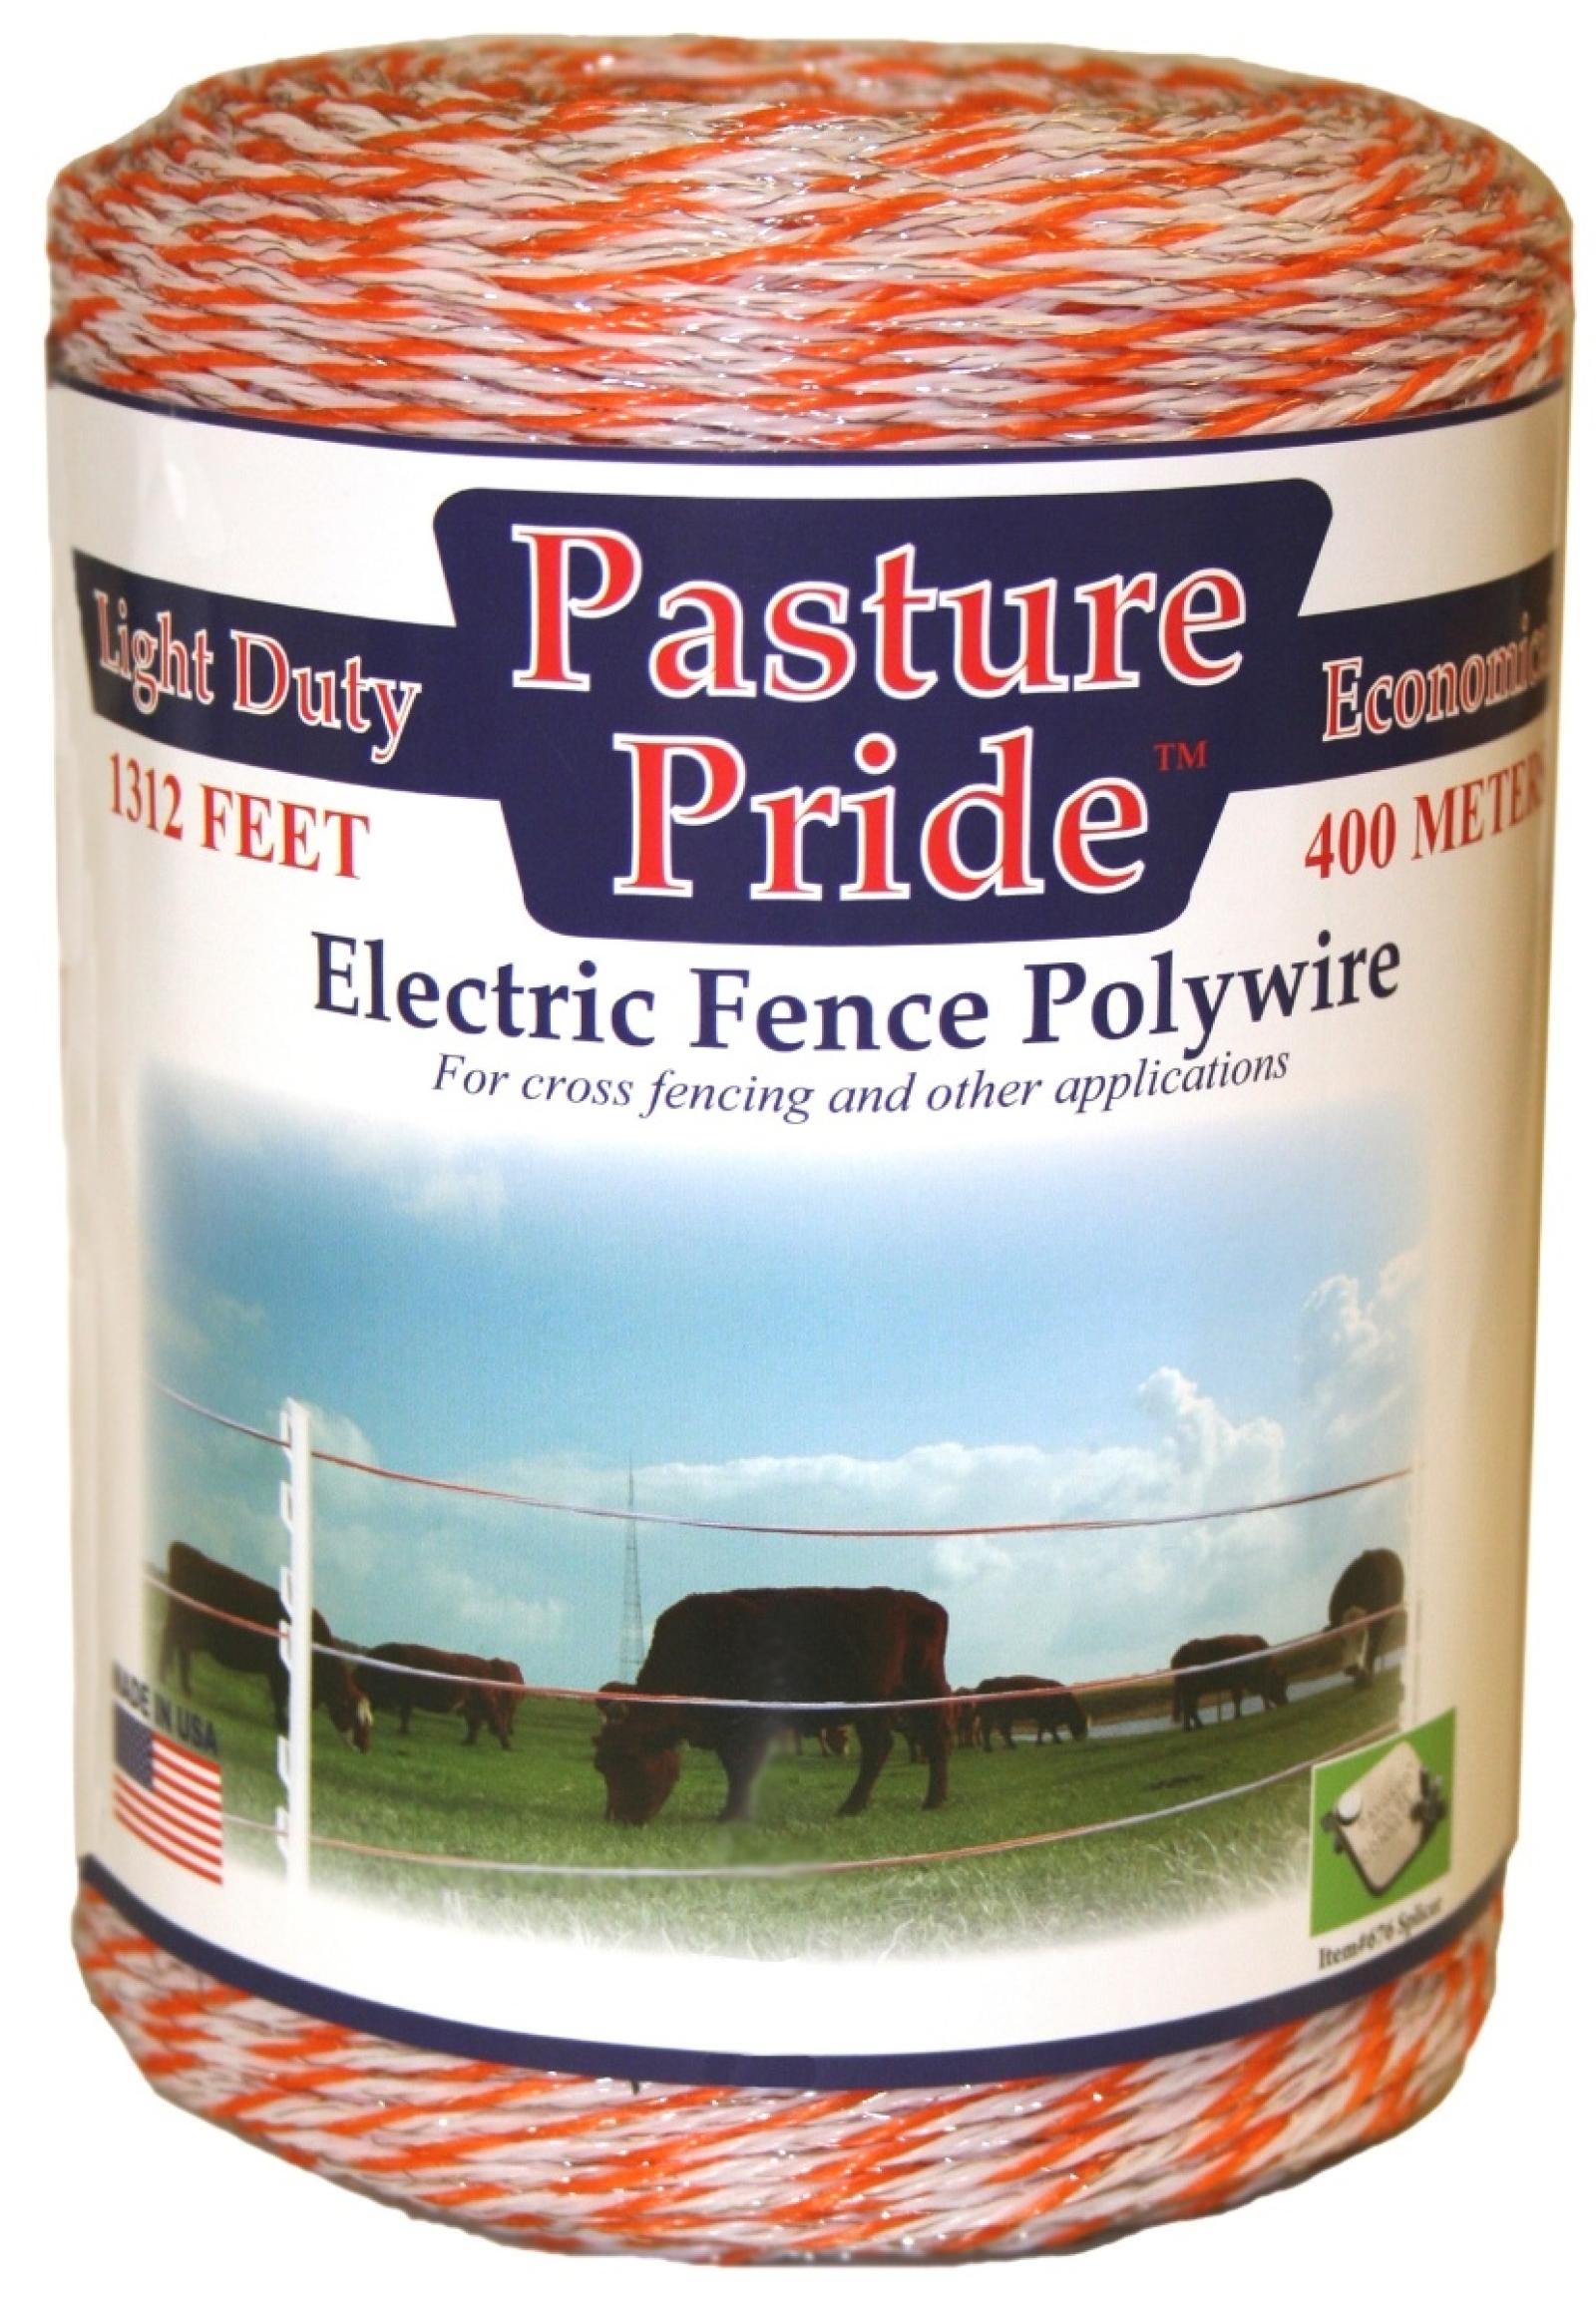 Pasture Pride Wire Electric Fence